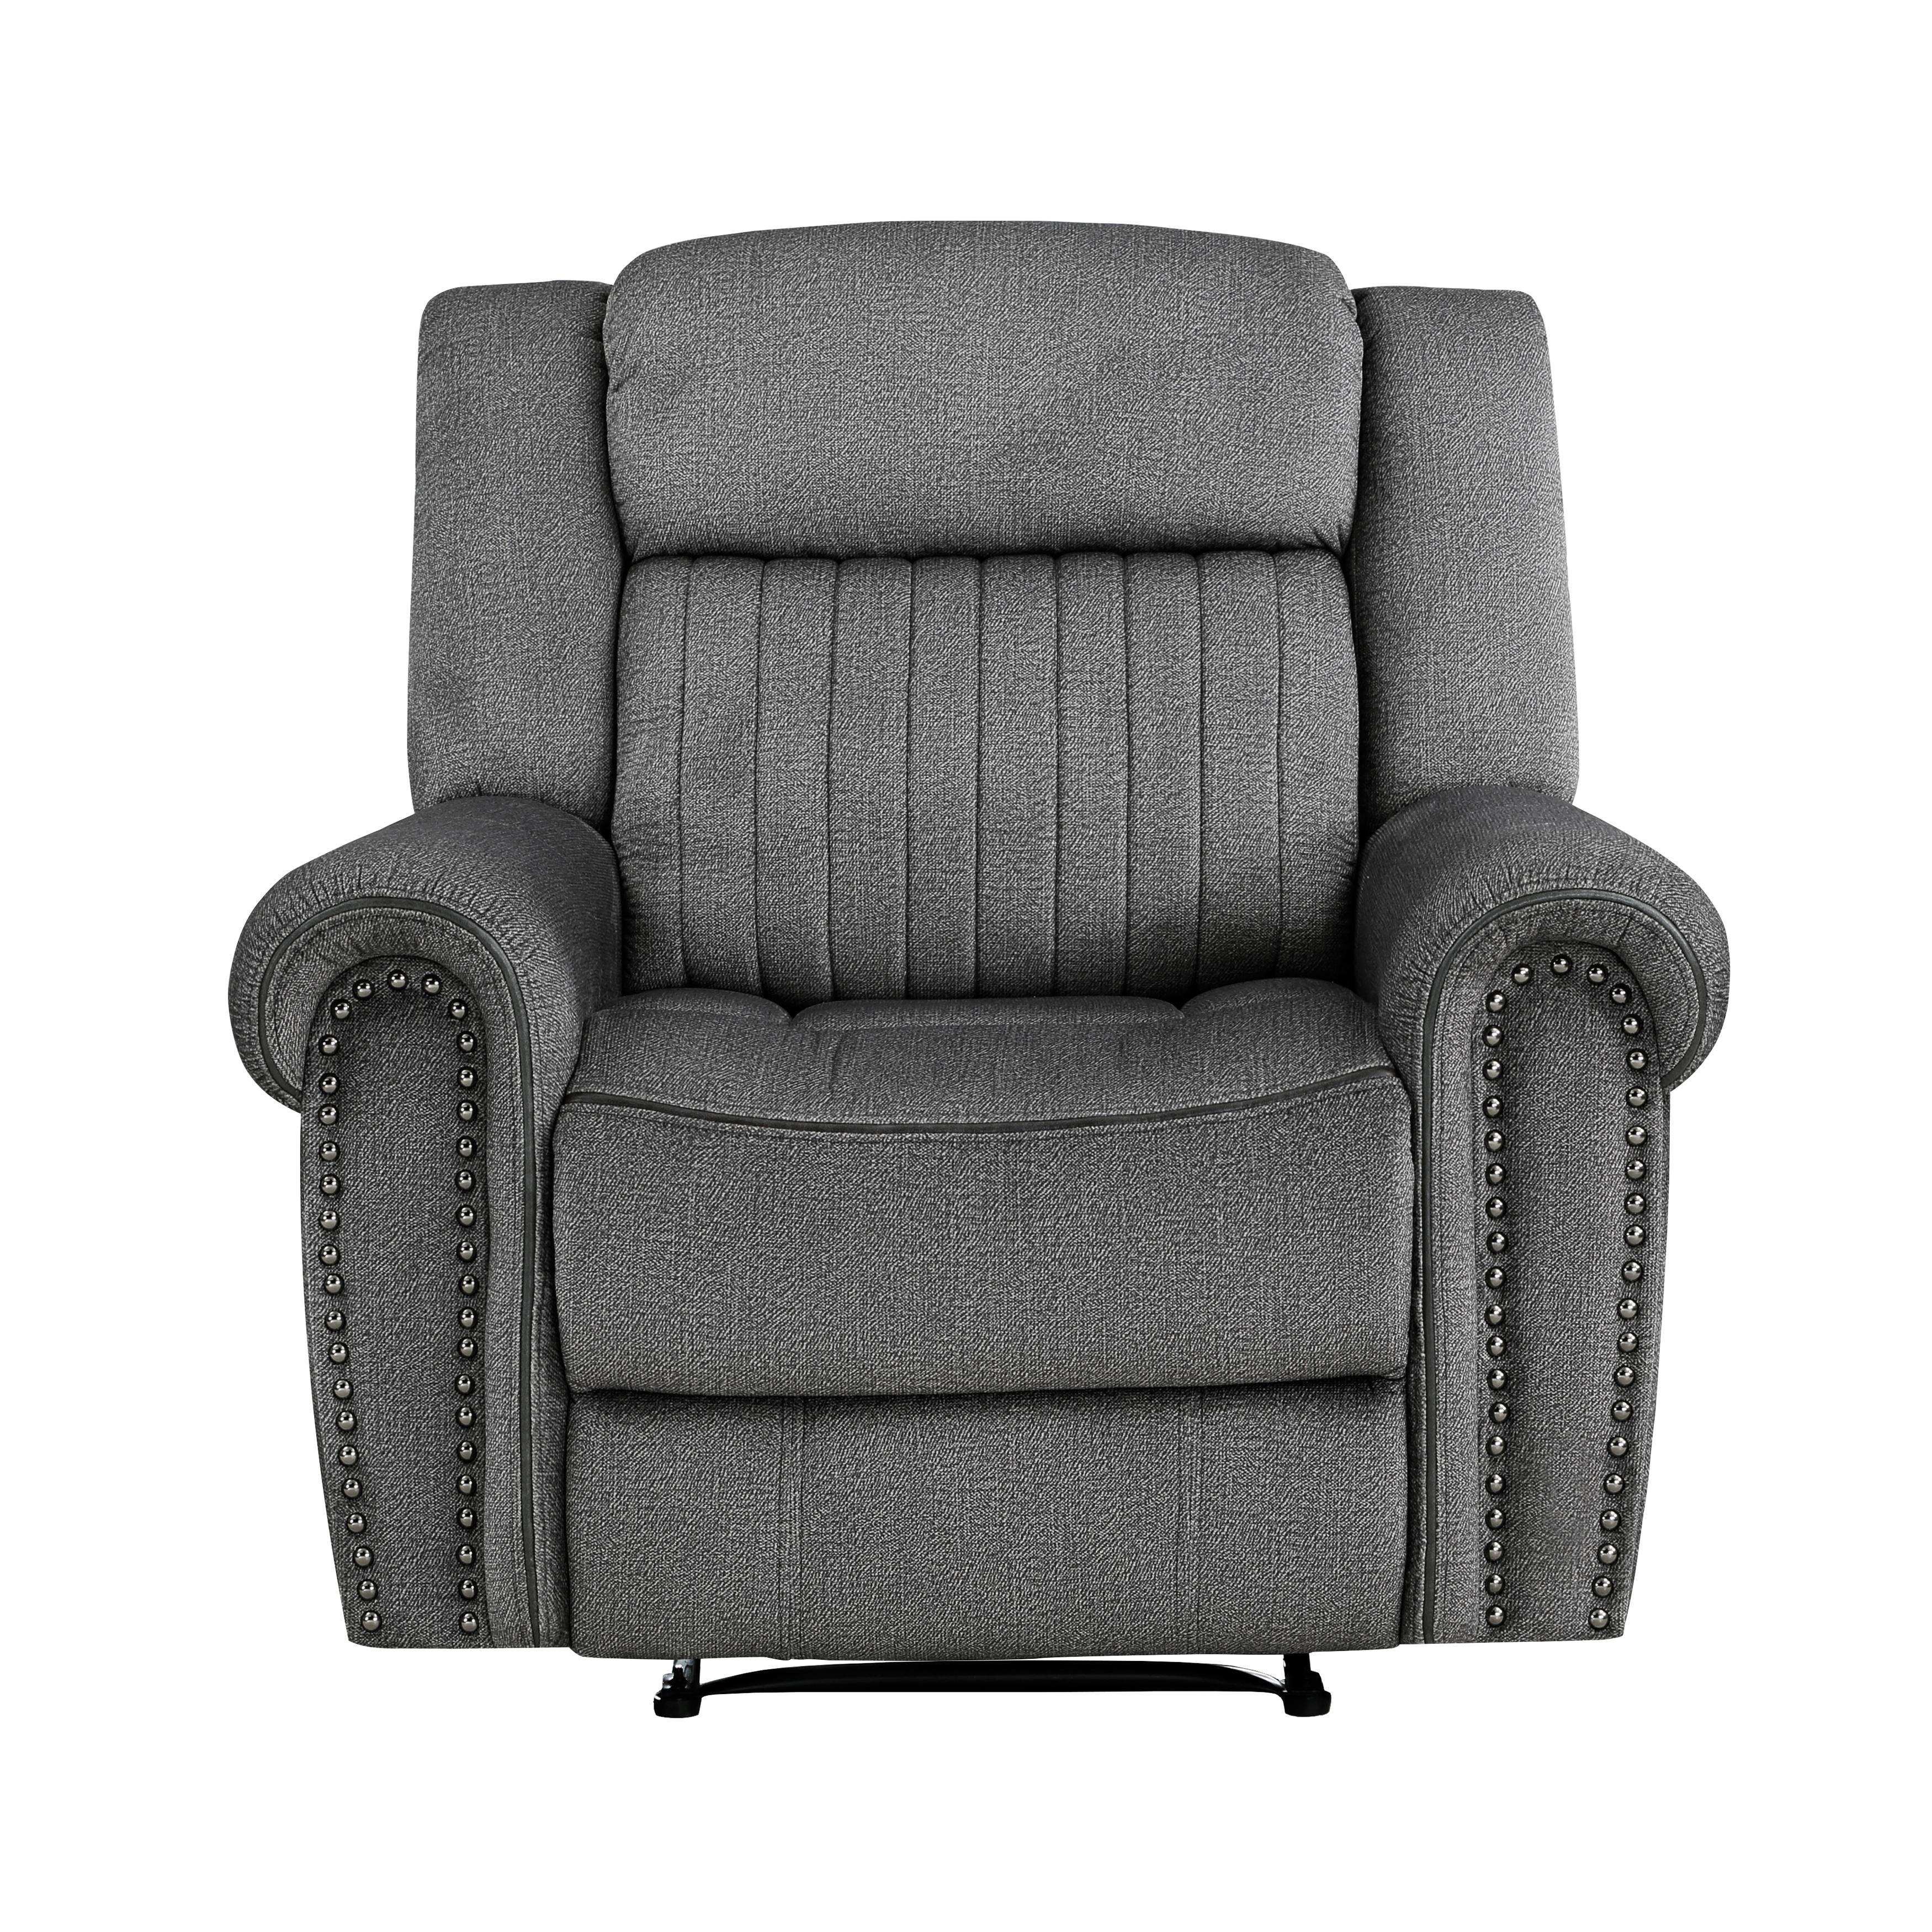 Transitional Reclining Chair 9204CC-1 Brennen 9204CC-1 in Charcoal Microfiber